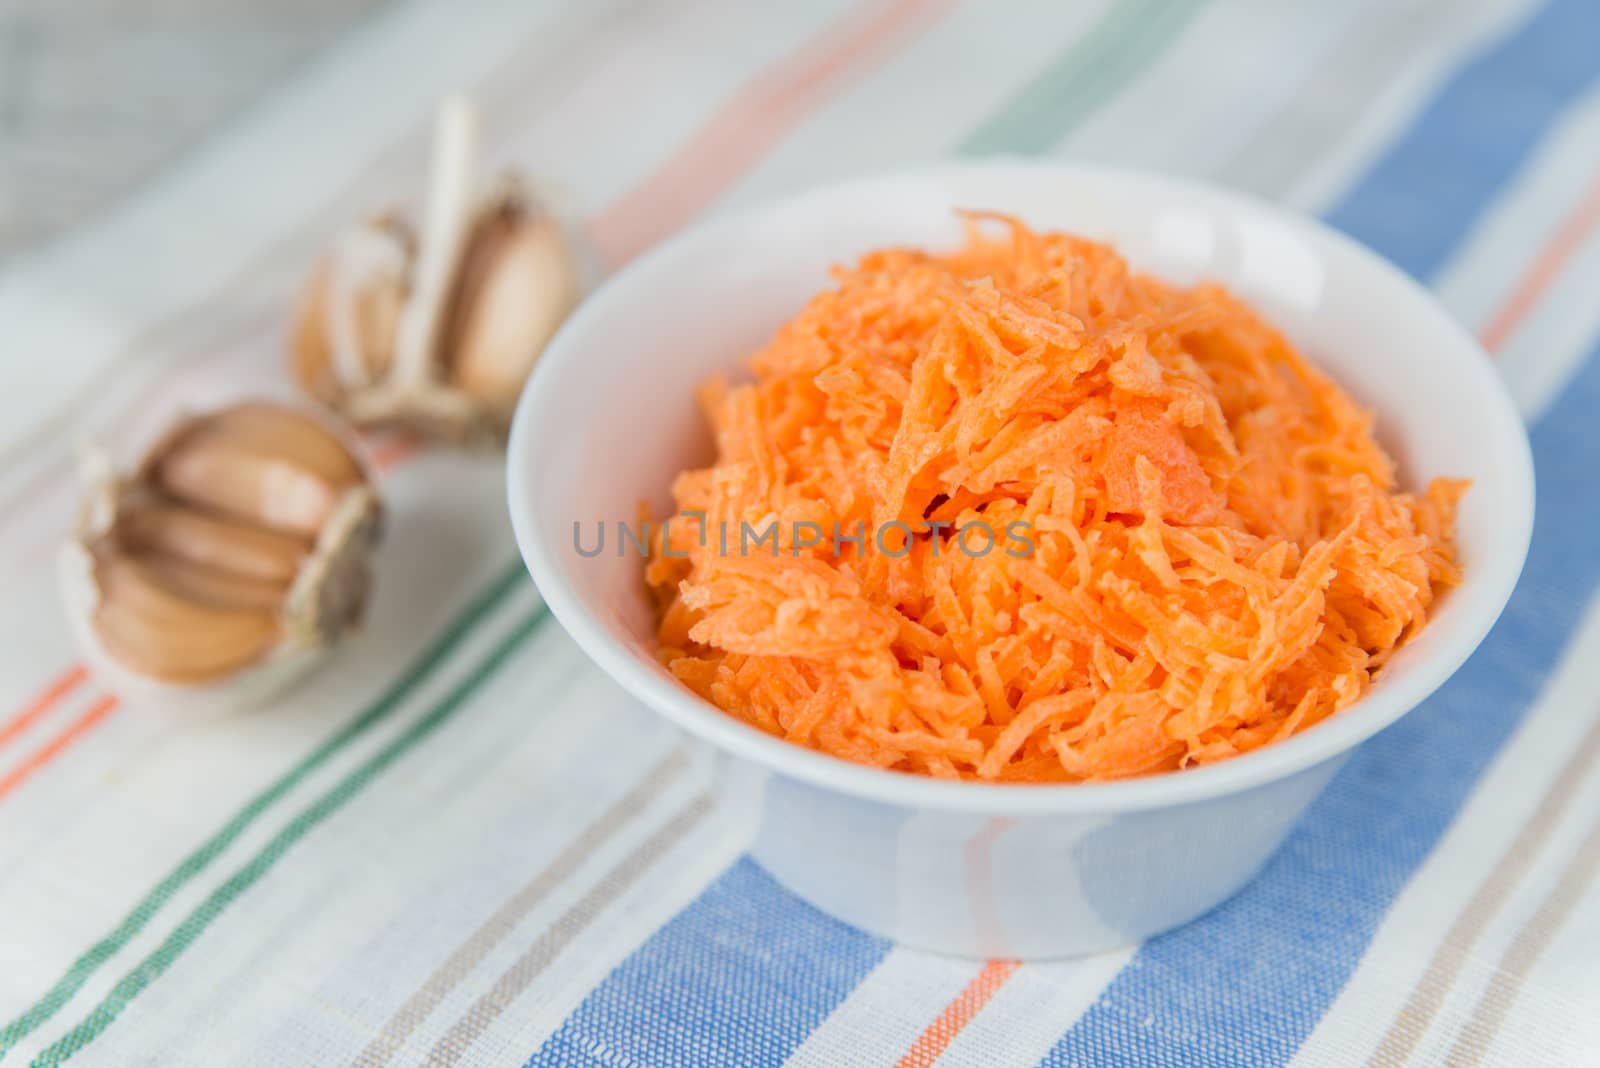 Carrot salad in the white plate with garlic